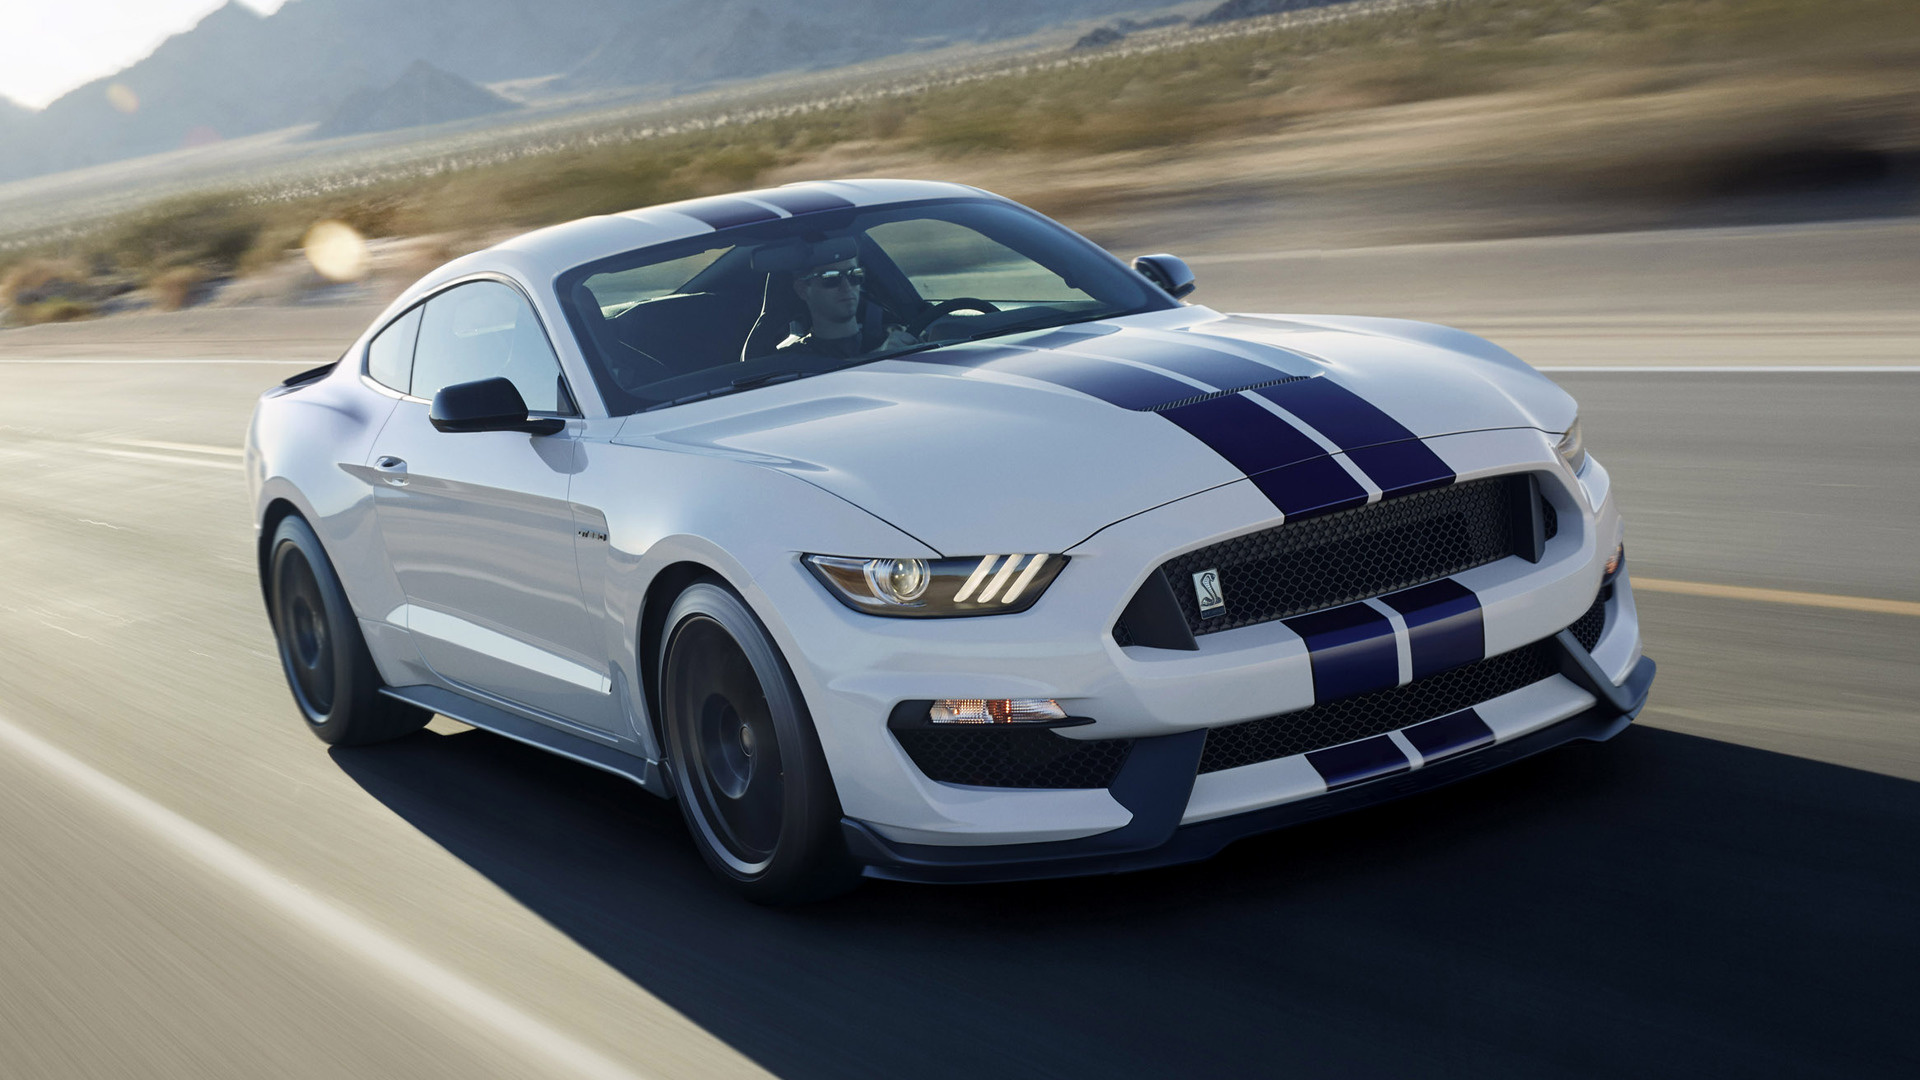 Shelby Gt350 Mustang Wallpaper And HD Image